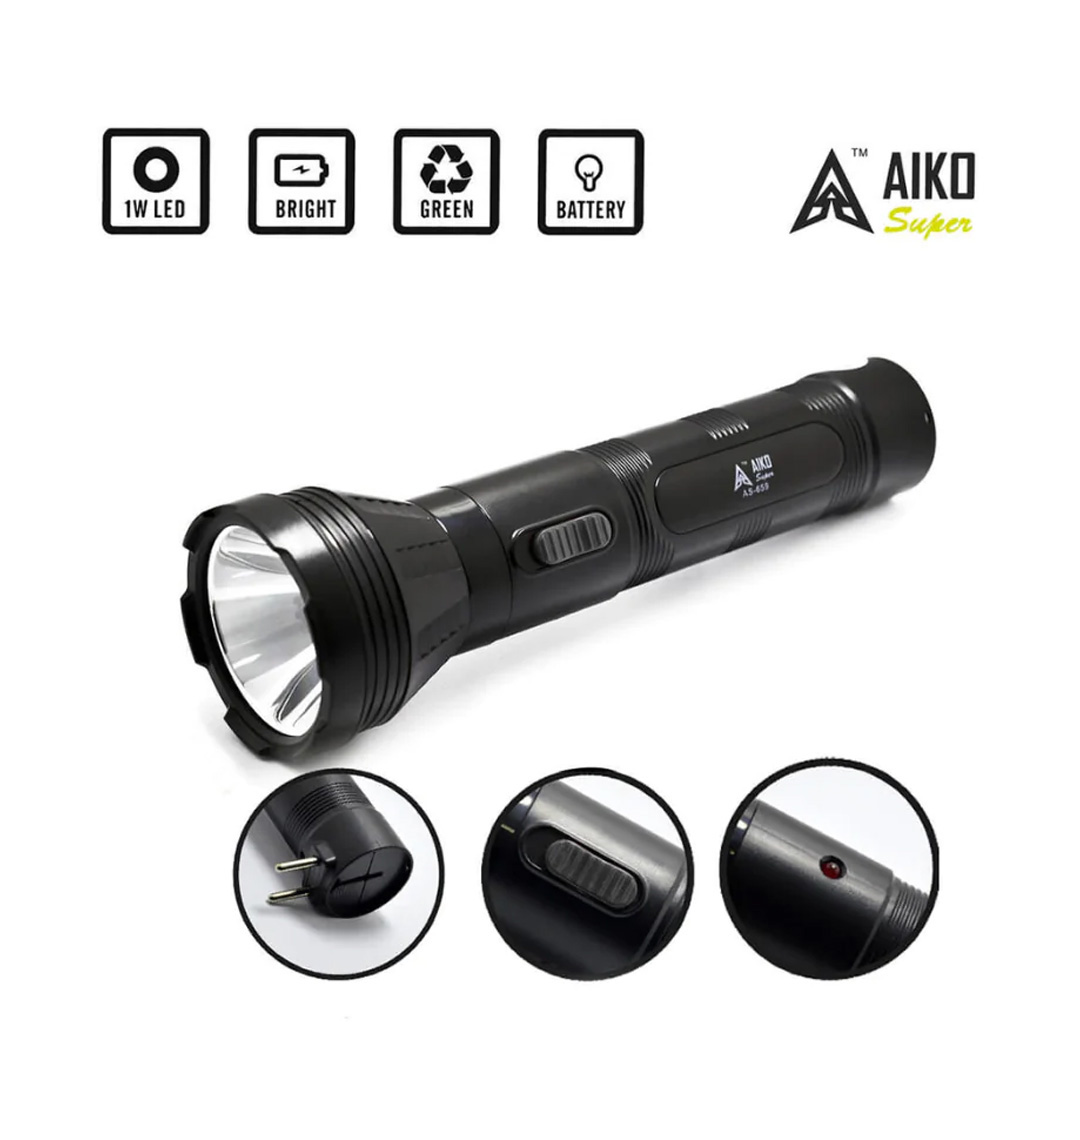 Aiko Super AS-655 Rechargeable Torch LED  Flashlight